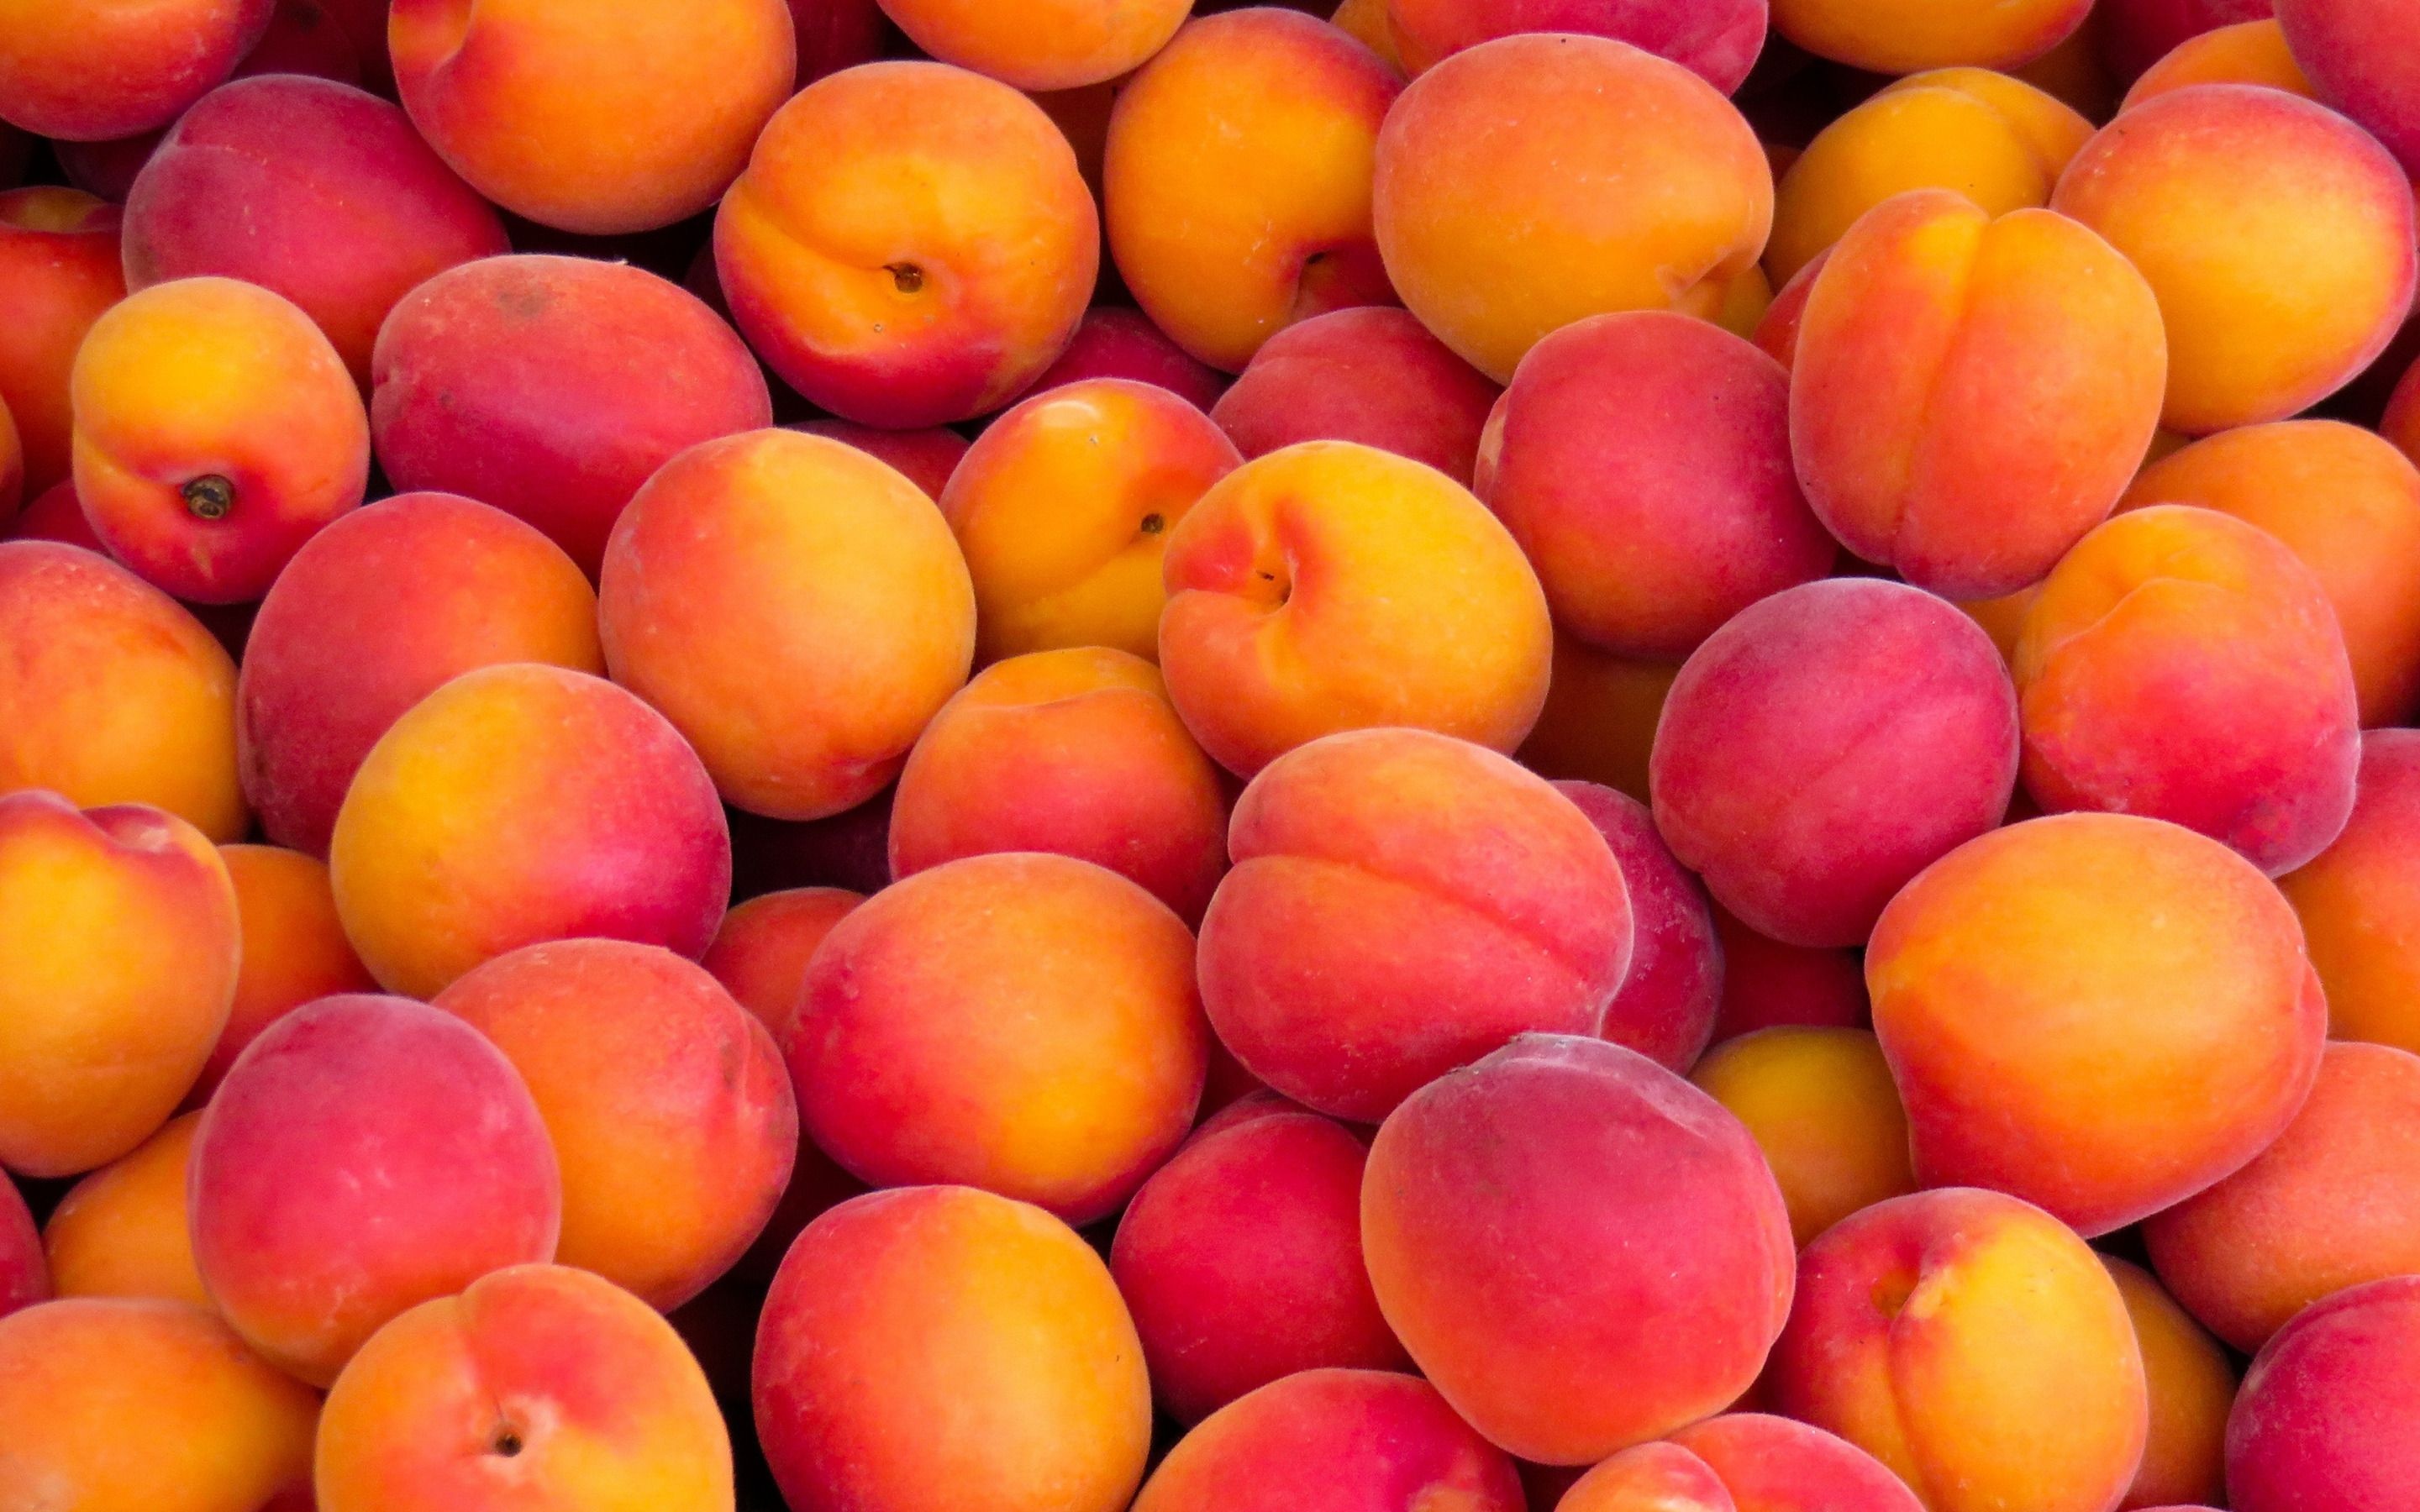 Peach: Rich in many vitamins, minerals, and beneficial plant compounds. 2880x1800 HD Wallpaper.